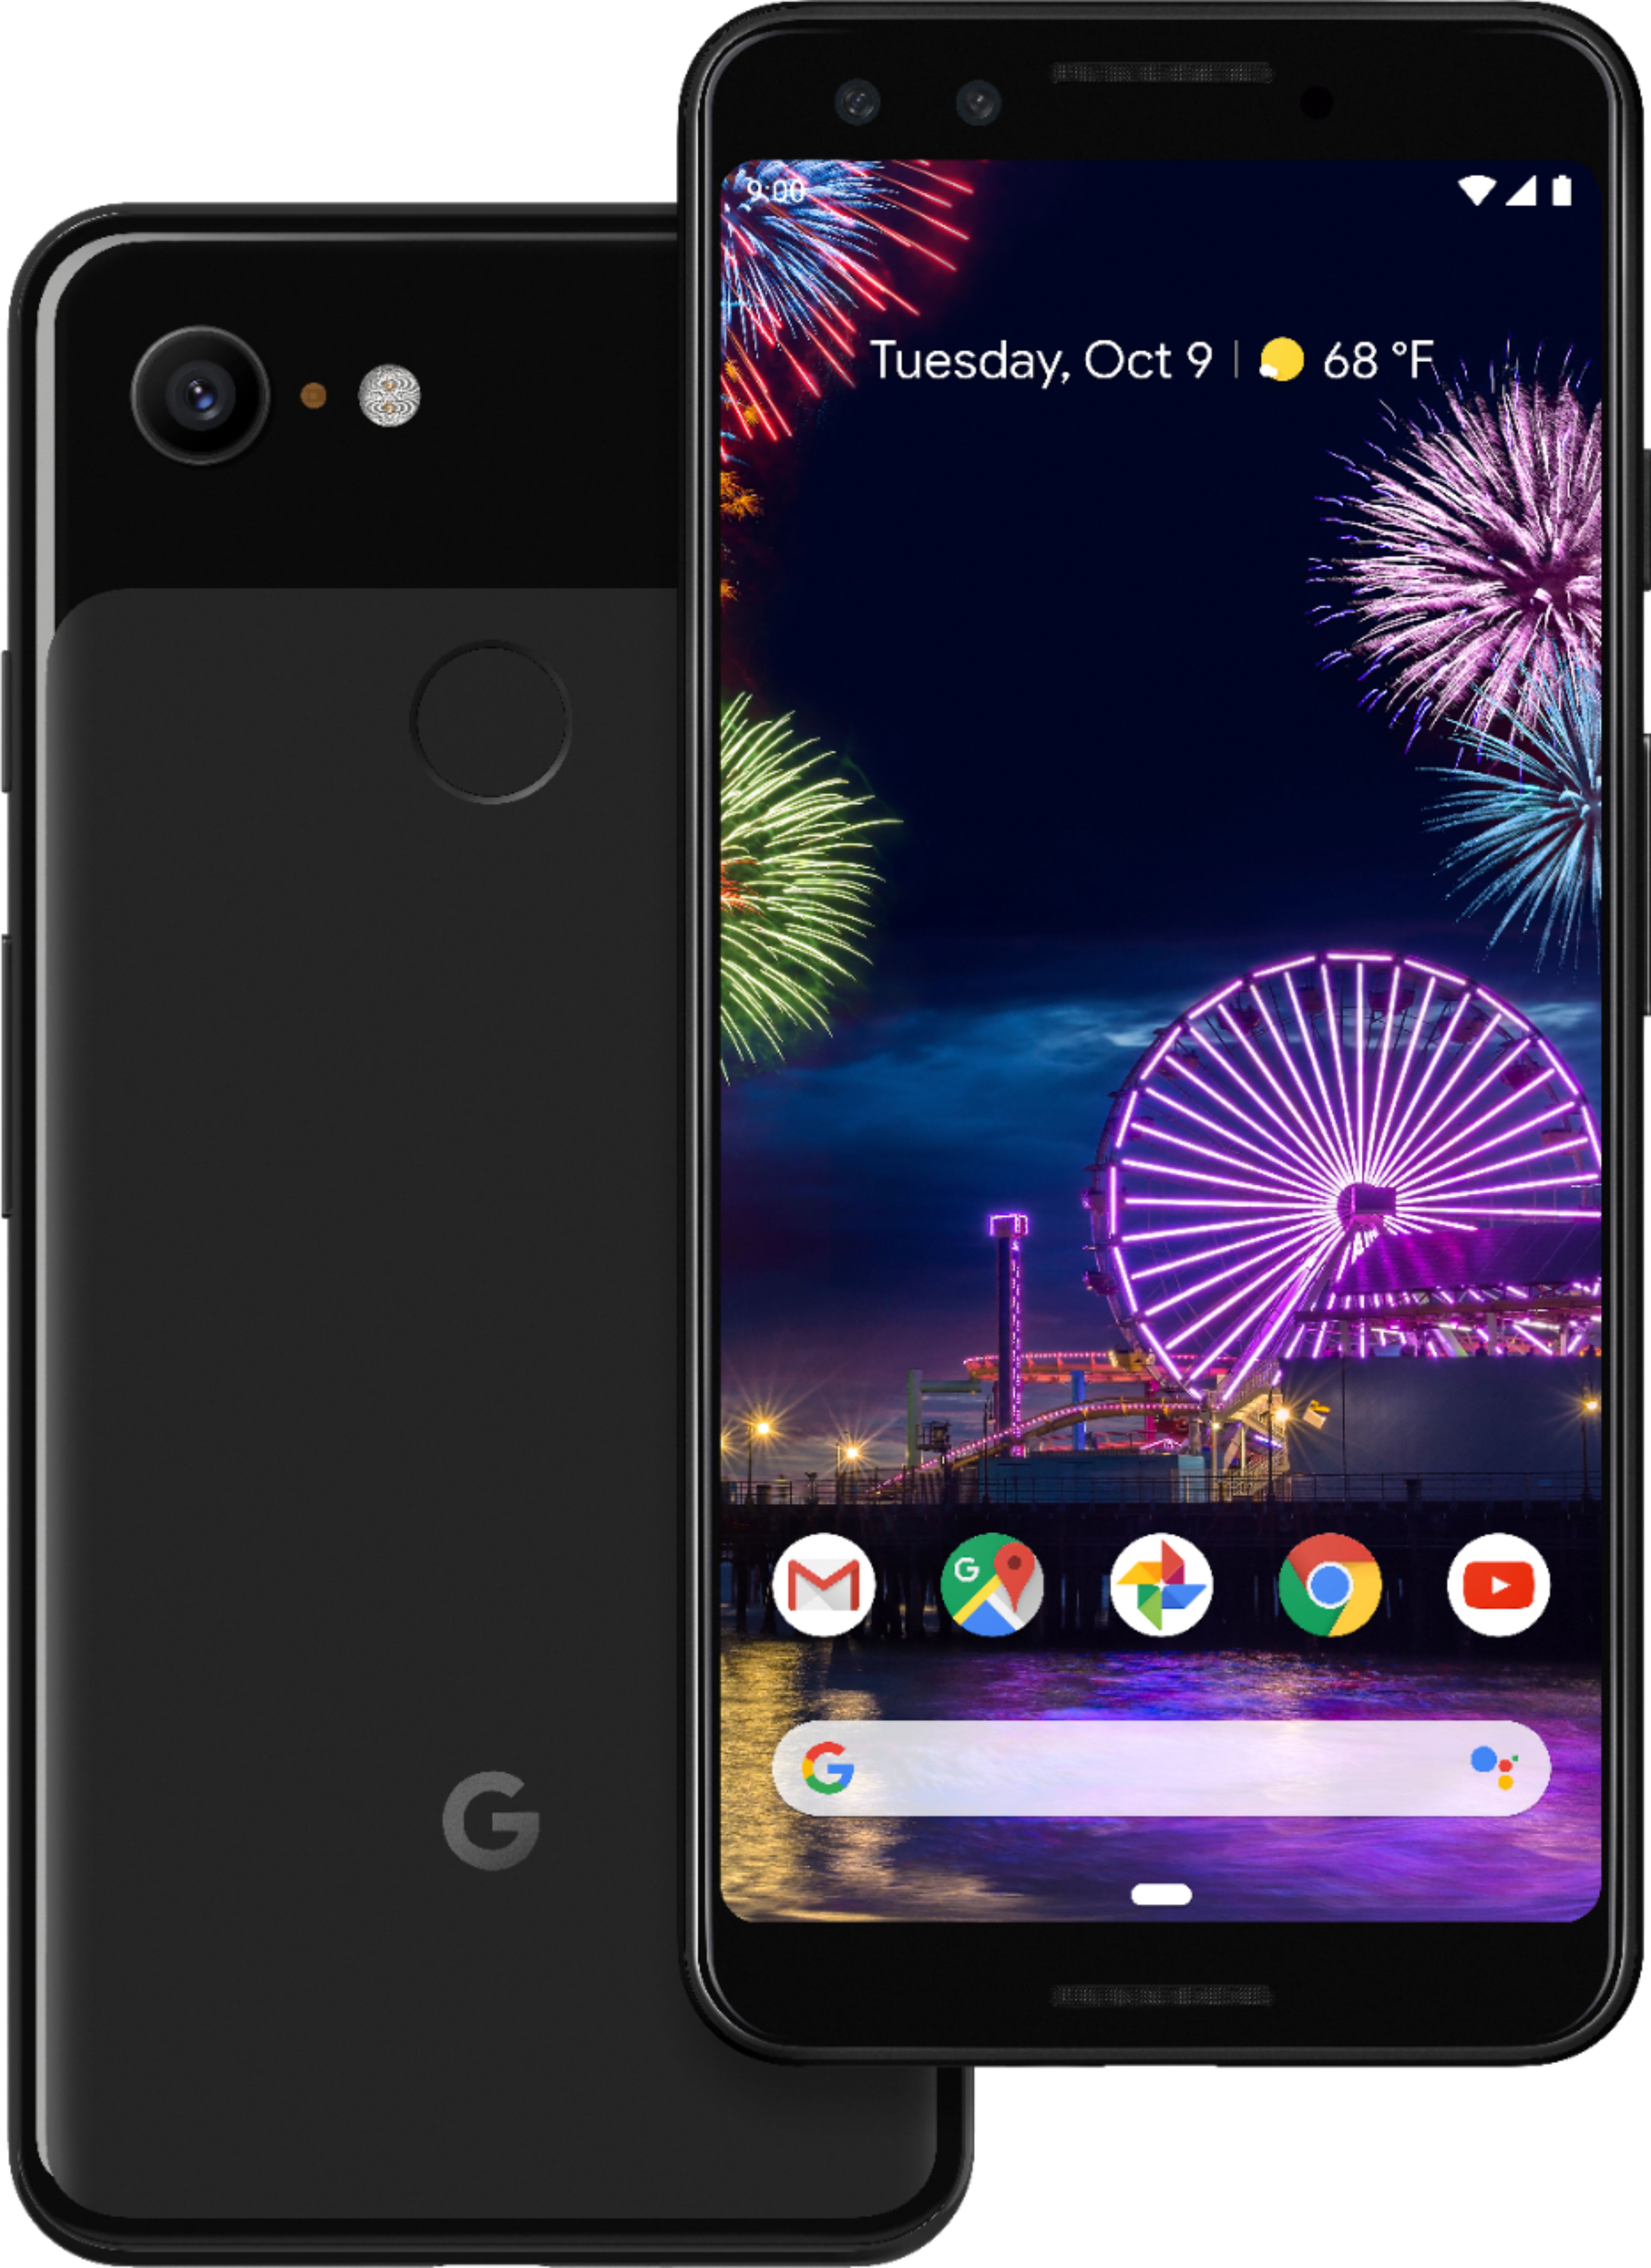 Details about   New *UNOPENED* Google Pixel 3 5.5" 64/128GB USA AT&T T-Mobil Verizon Smartphone 